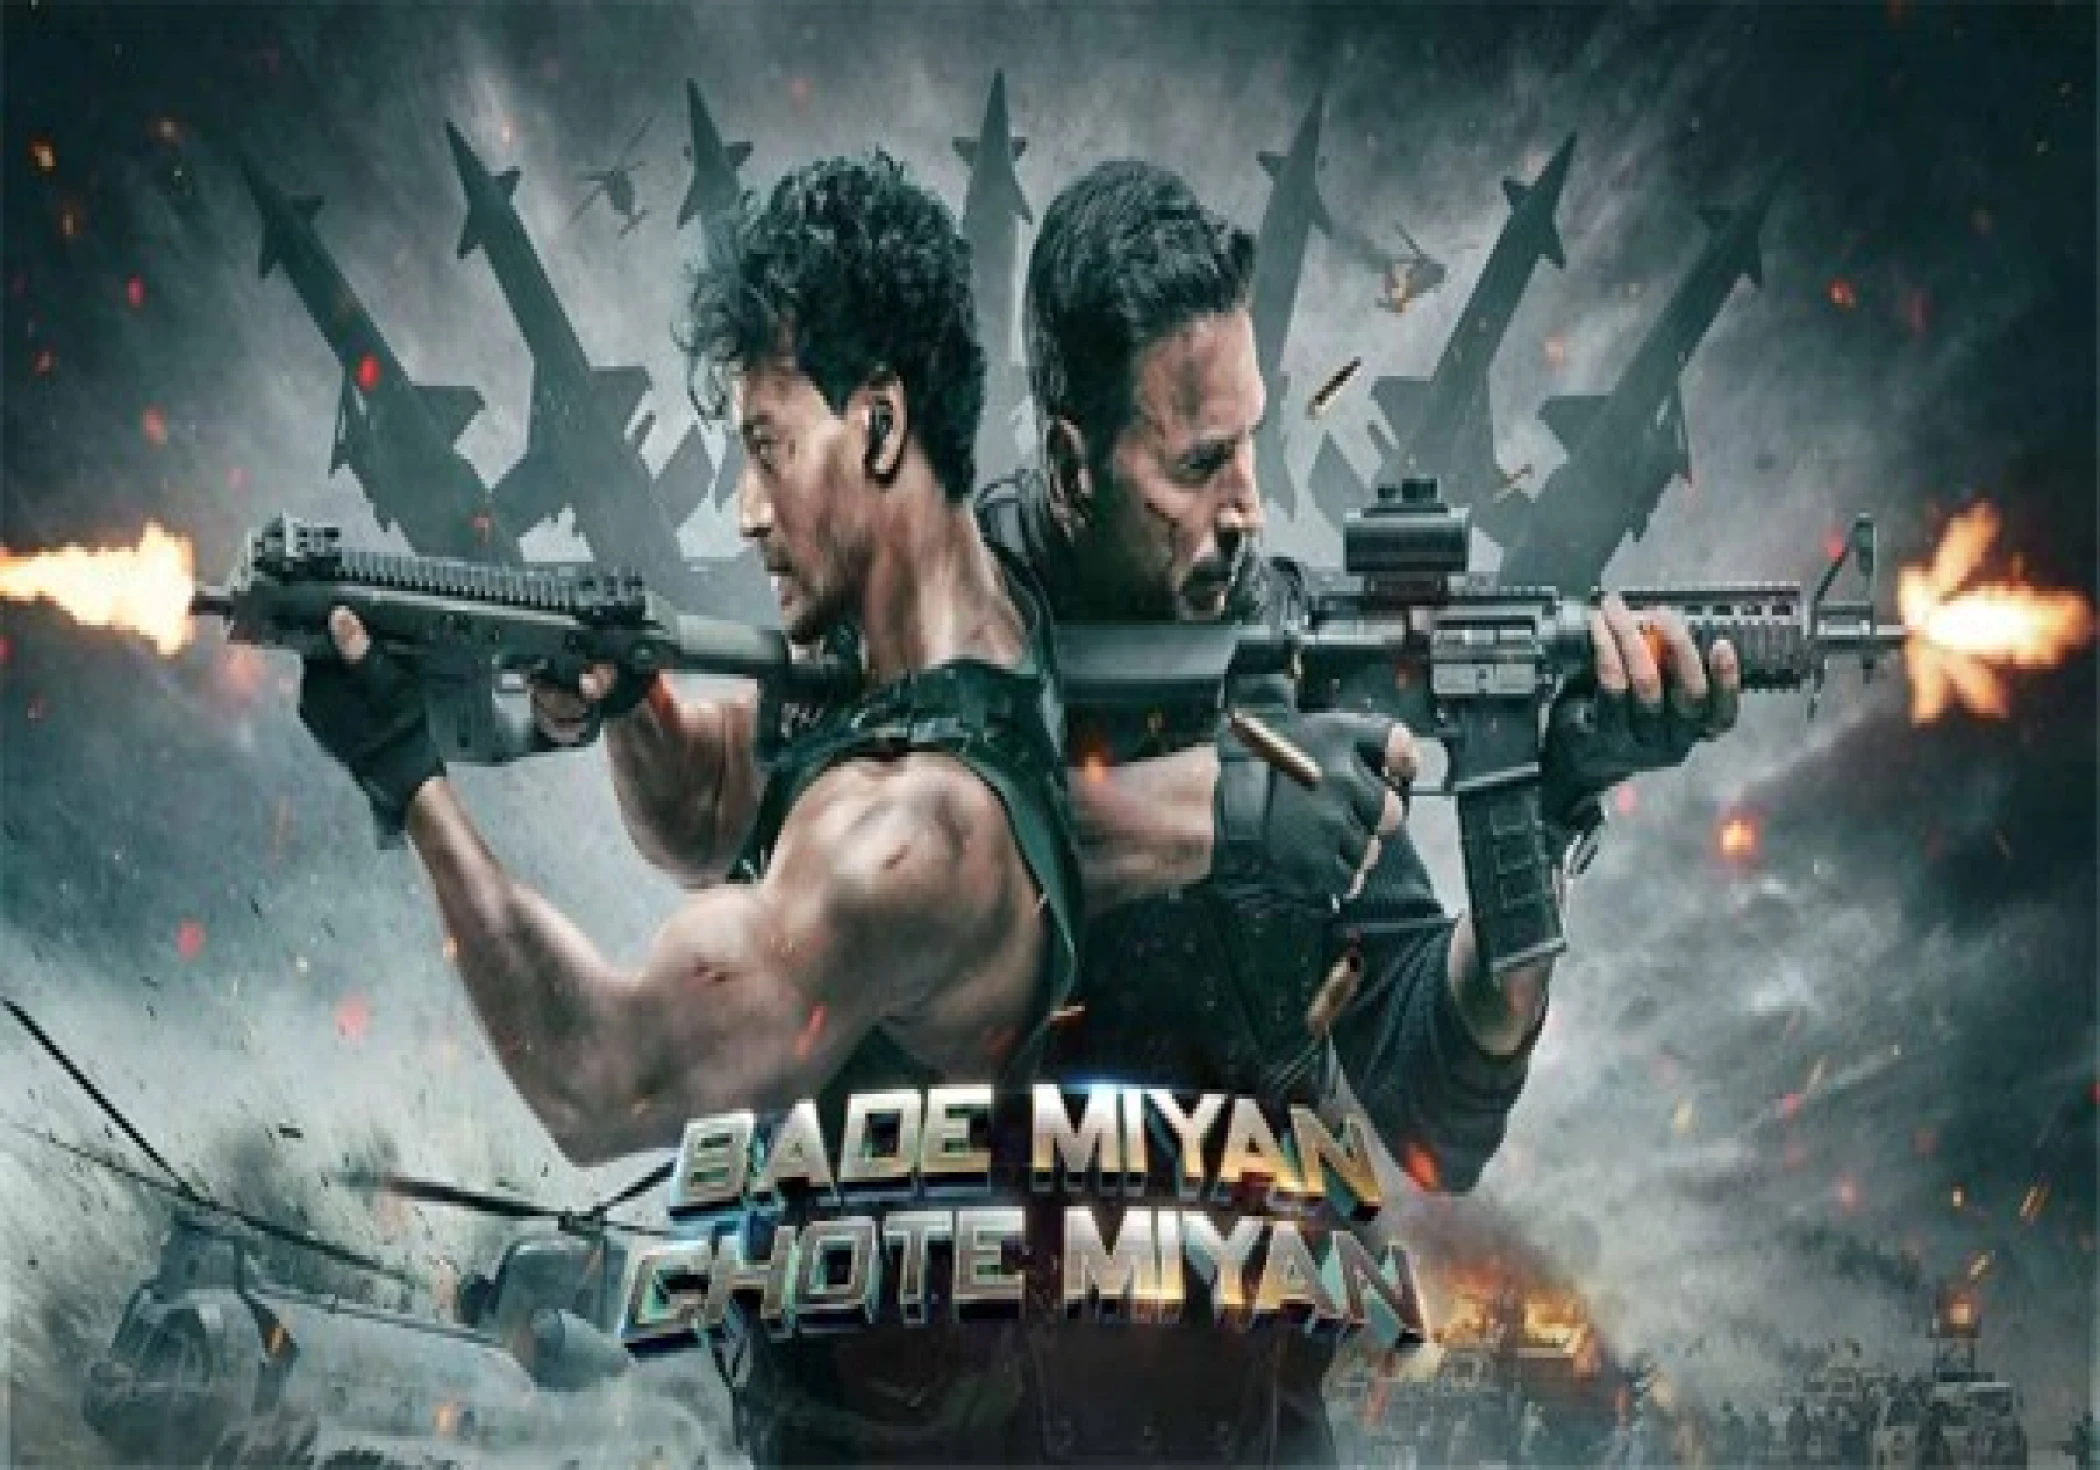 Trailer of Bade Miyan Chote Miyan to Release on Holi, Film Set to Hit Theaters on Eid